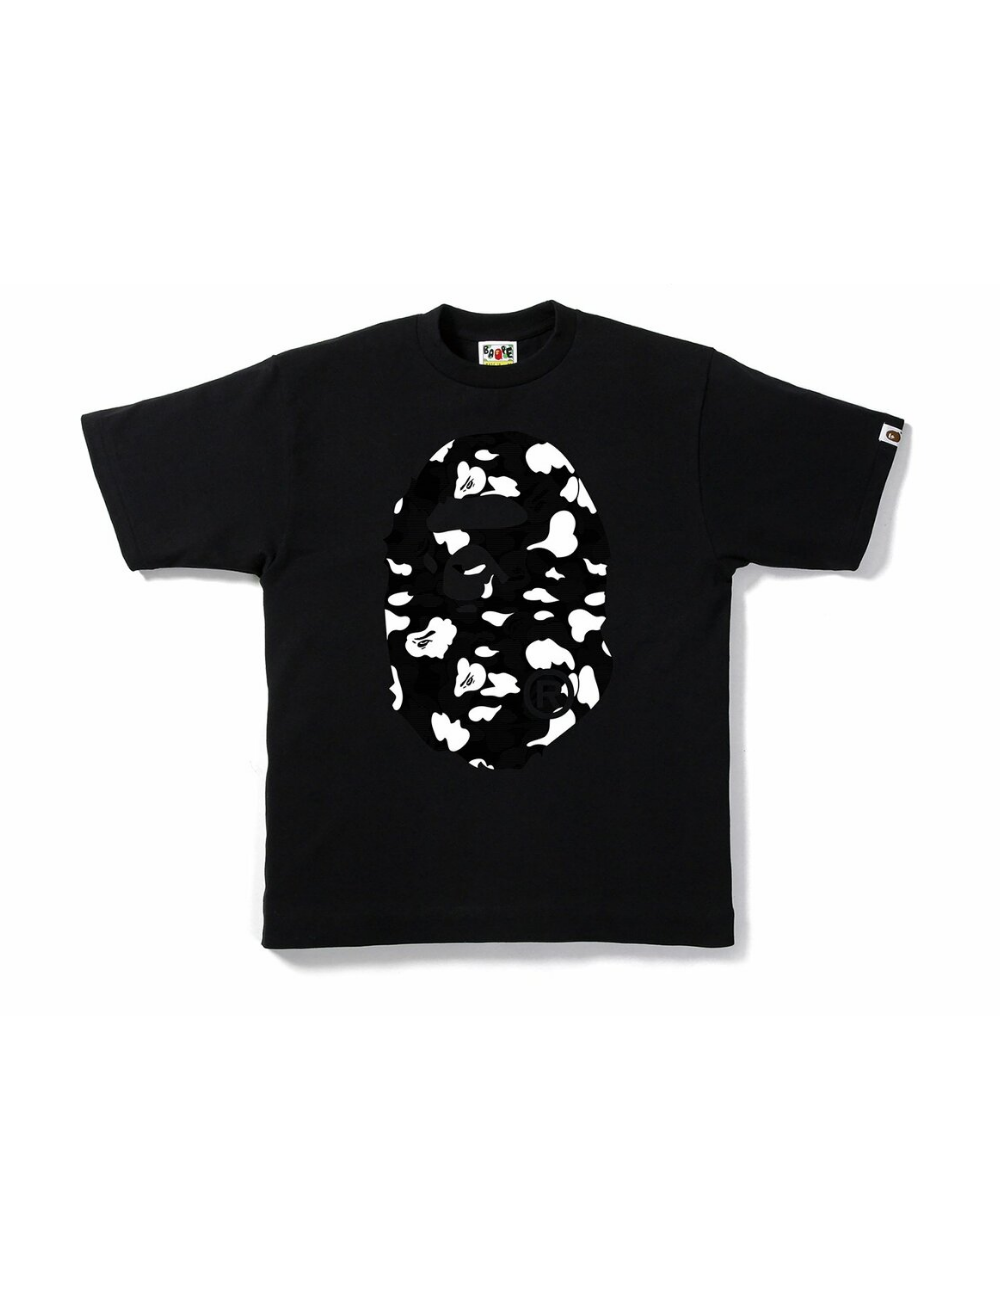 BAPE Stripe ABC Camo Big Ape Head Tee (Black) - Shop Streetwear, Sneakers, Slippers and Gifts online | Malaysia - The Factory KL